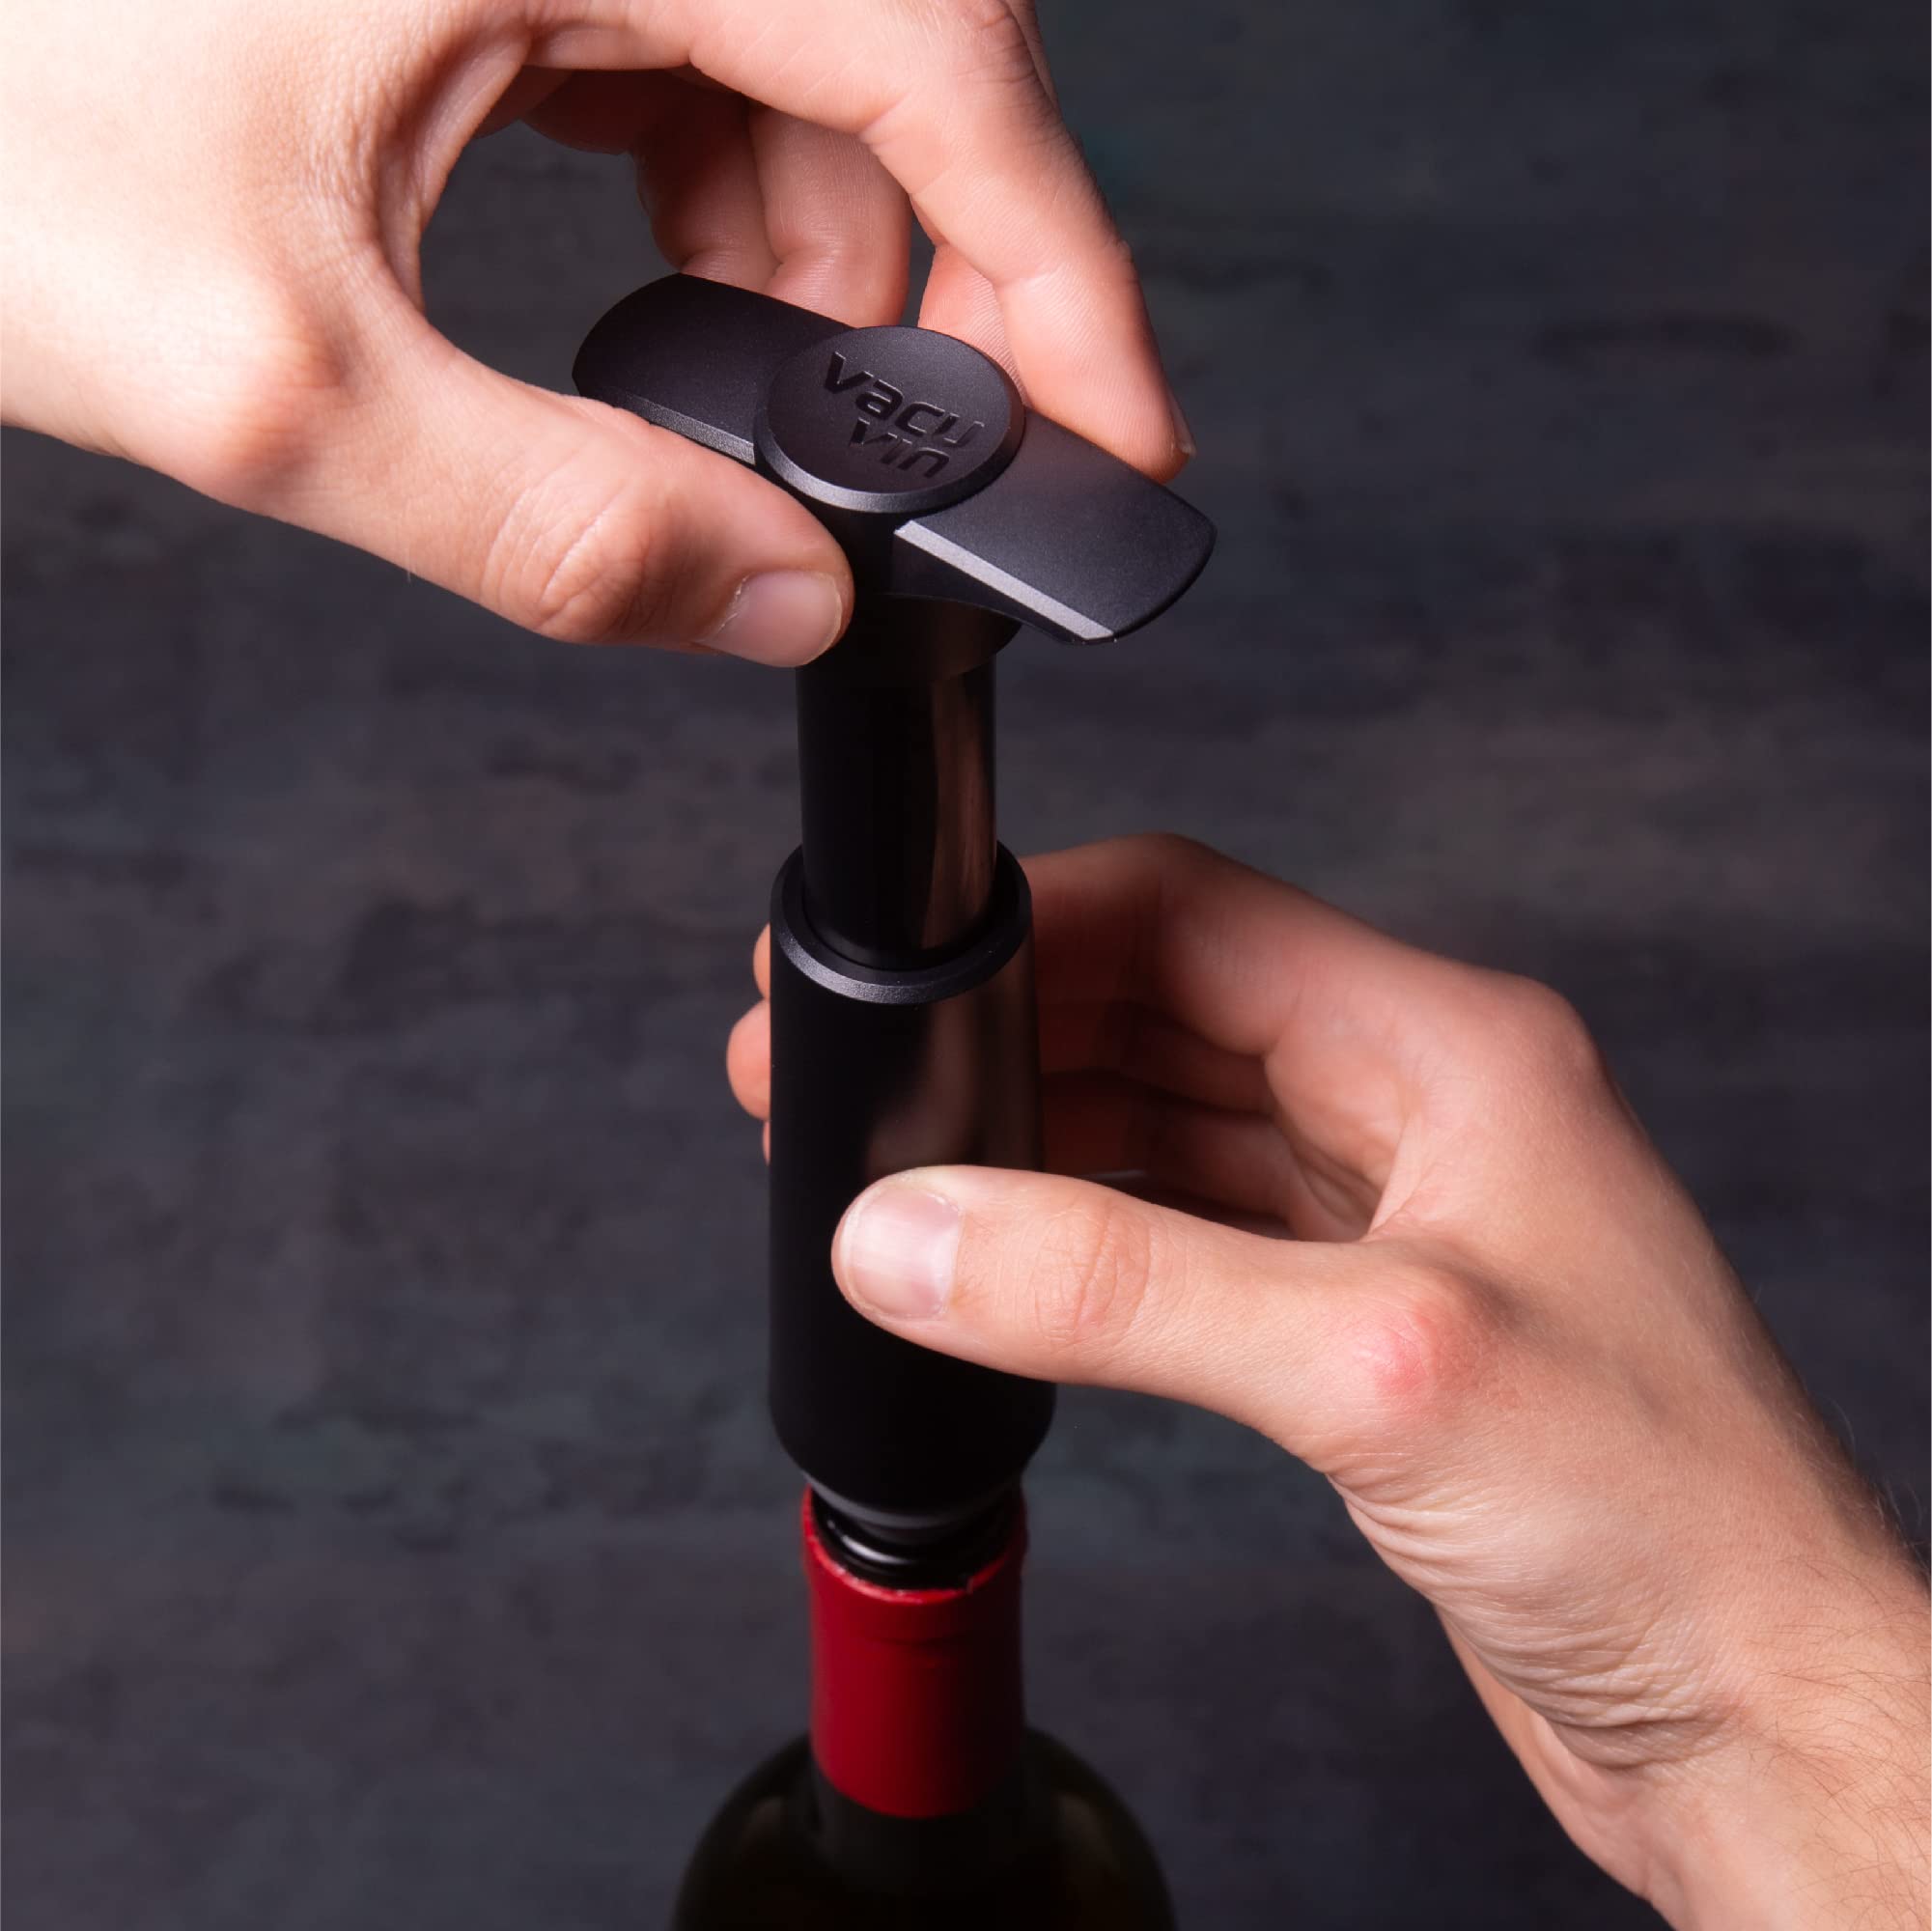 Vacu Vin Wine Saver Pump Grey with Vacuum Wine Stopper - Keep Your Wine Fresh for up to 10 Days - 1 Pump 2 Stoppers - Reusable - Made in the Netherlands